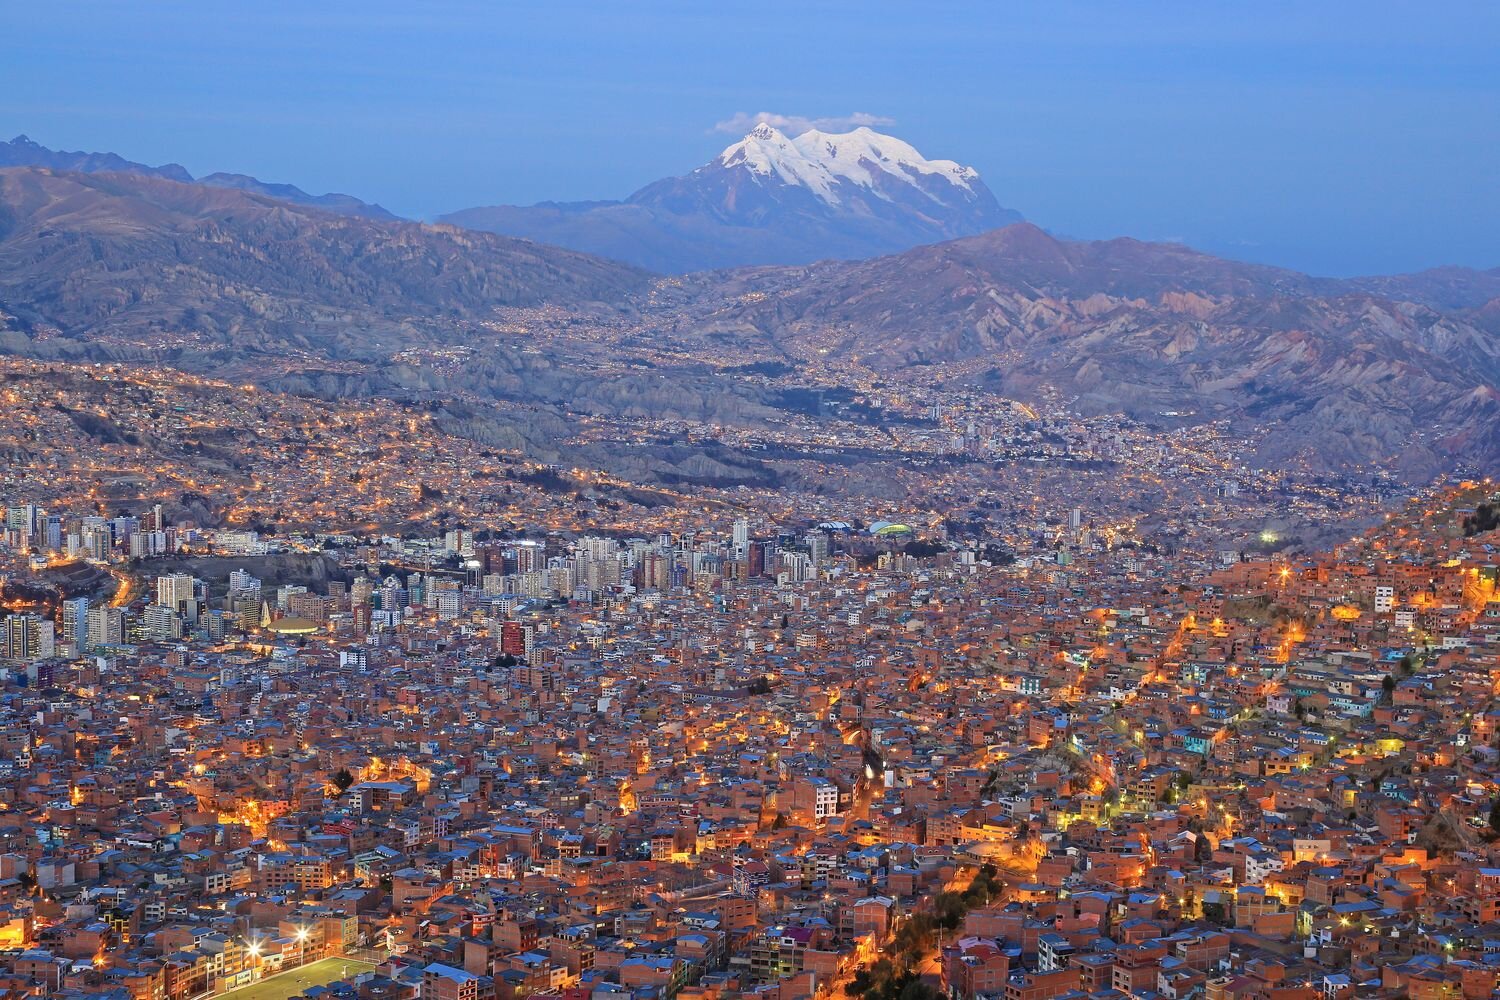  A view of the city of La Paz with the Nevado Illimani in the background 